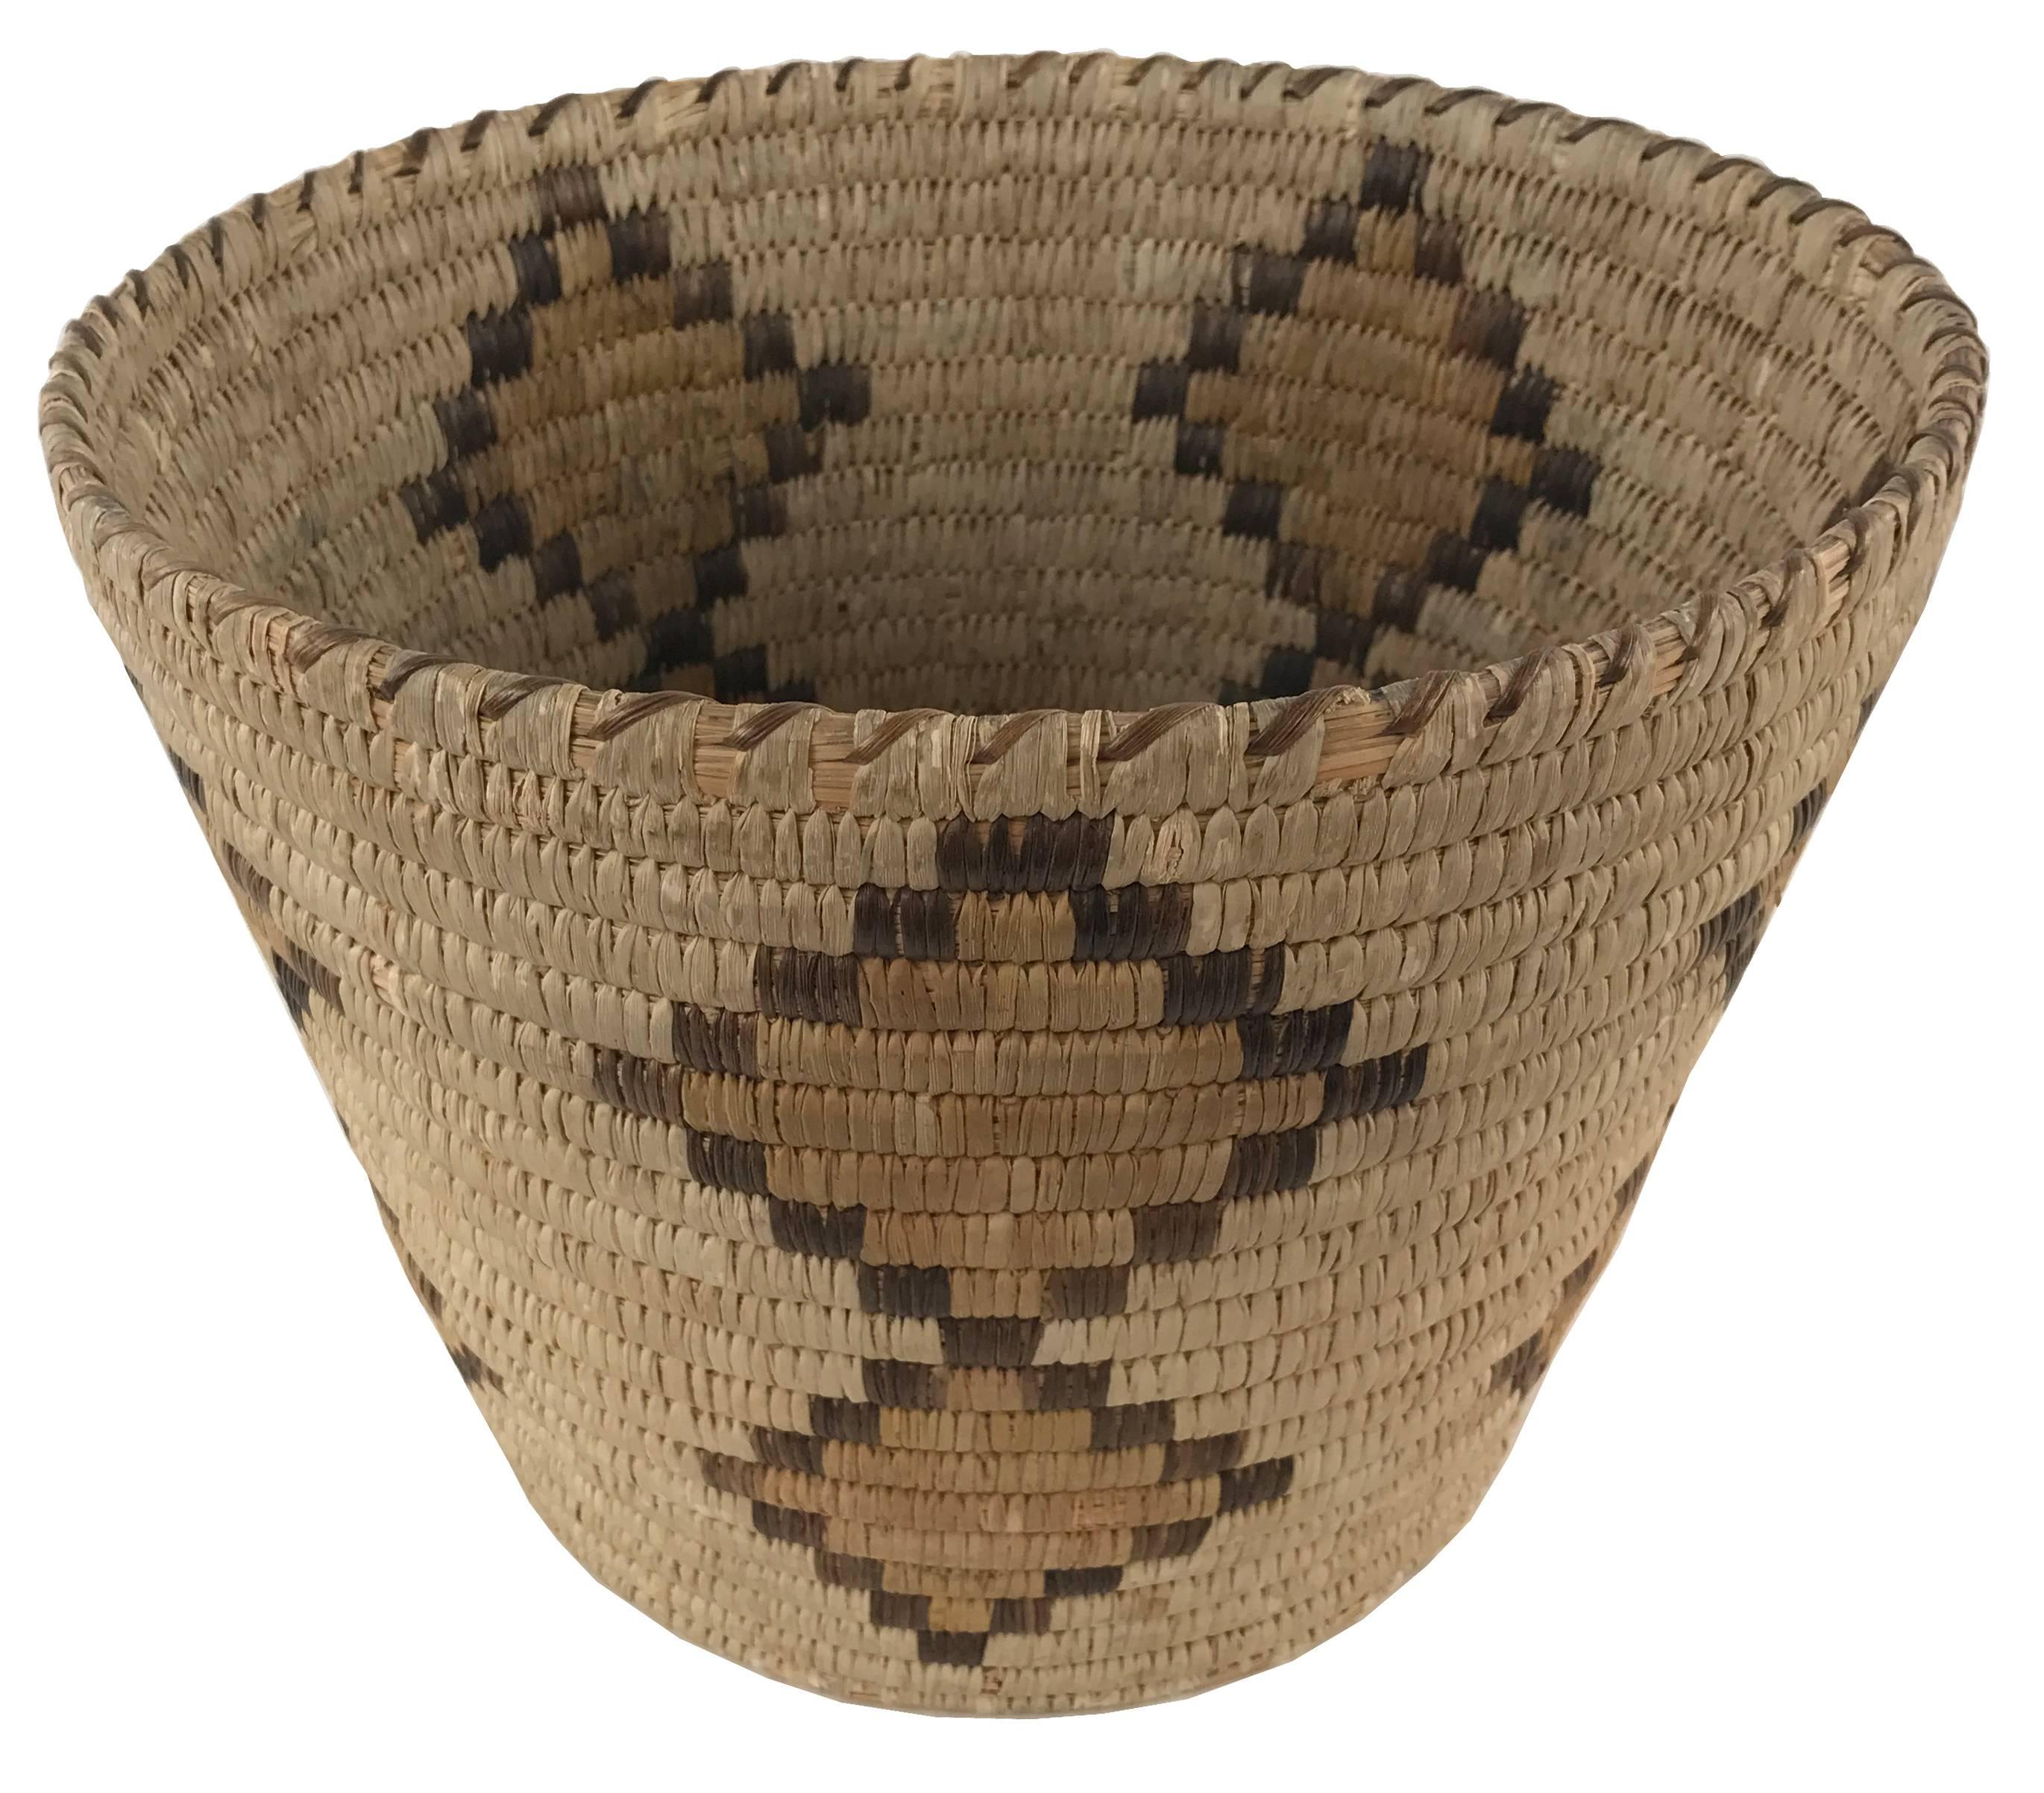 A Native American twined woven basket with a tapering form leading to a coiled base. The body is decorated with a woven double diamond motif in a dark and yellow design that contrasts with the light ground.